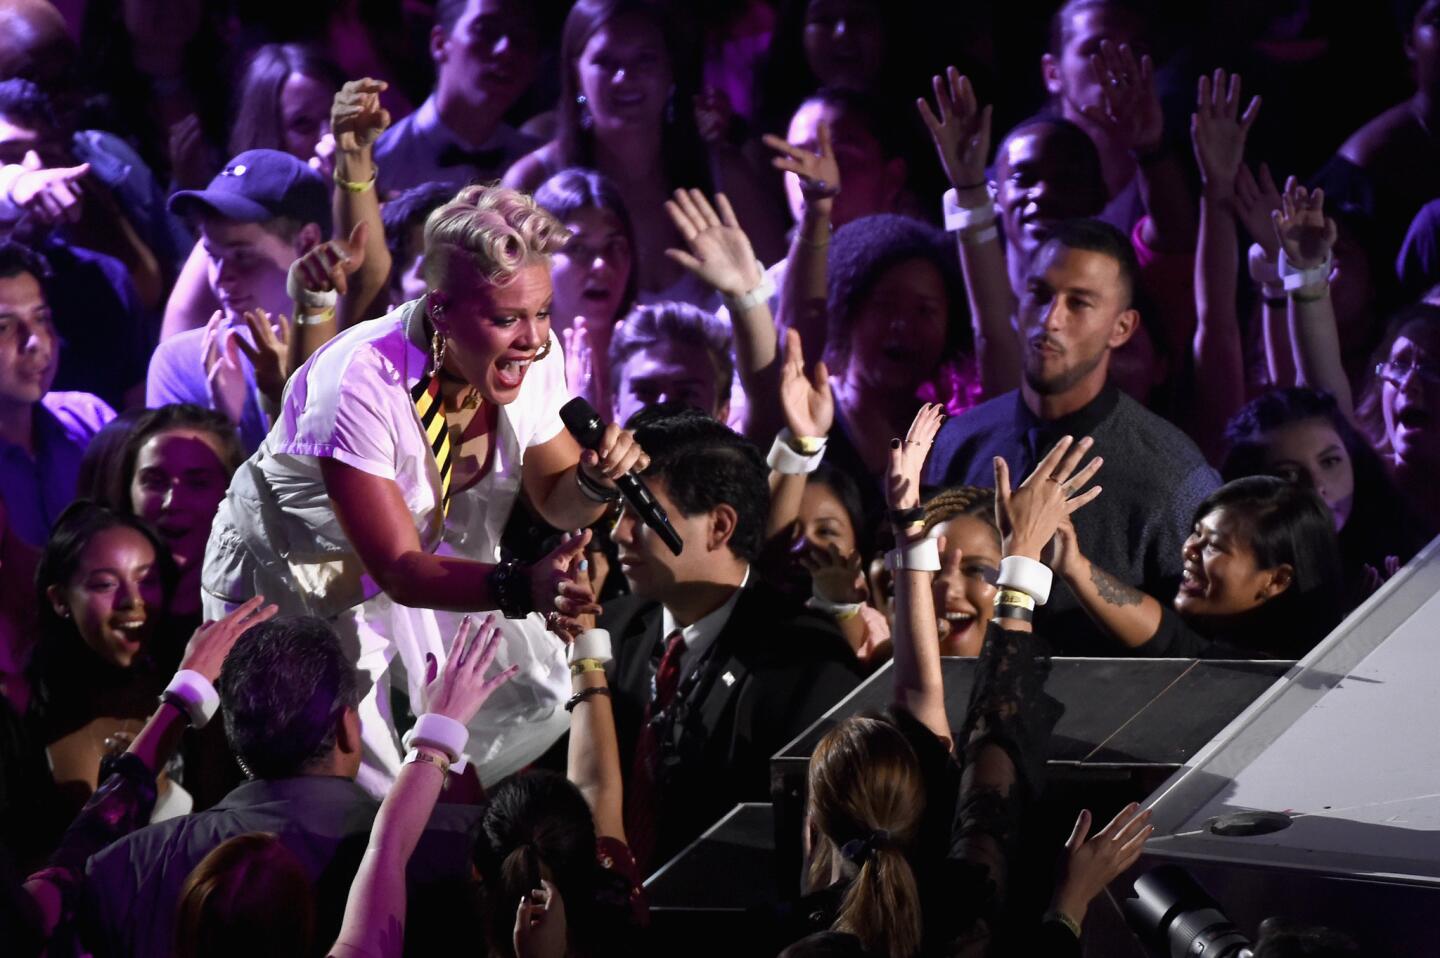 Pink interacts with the crownd during her performance.